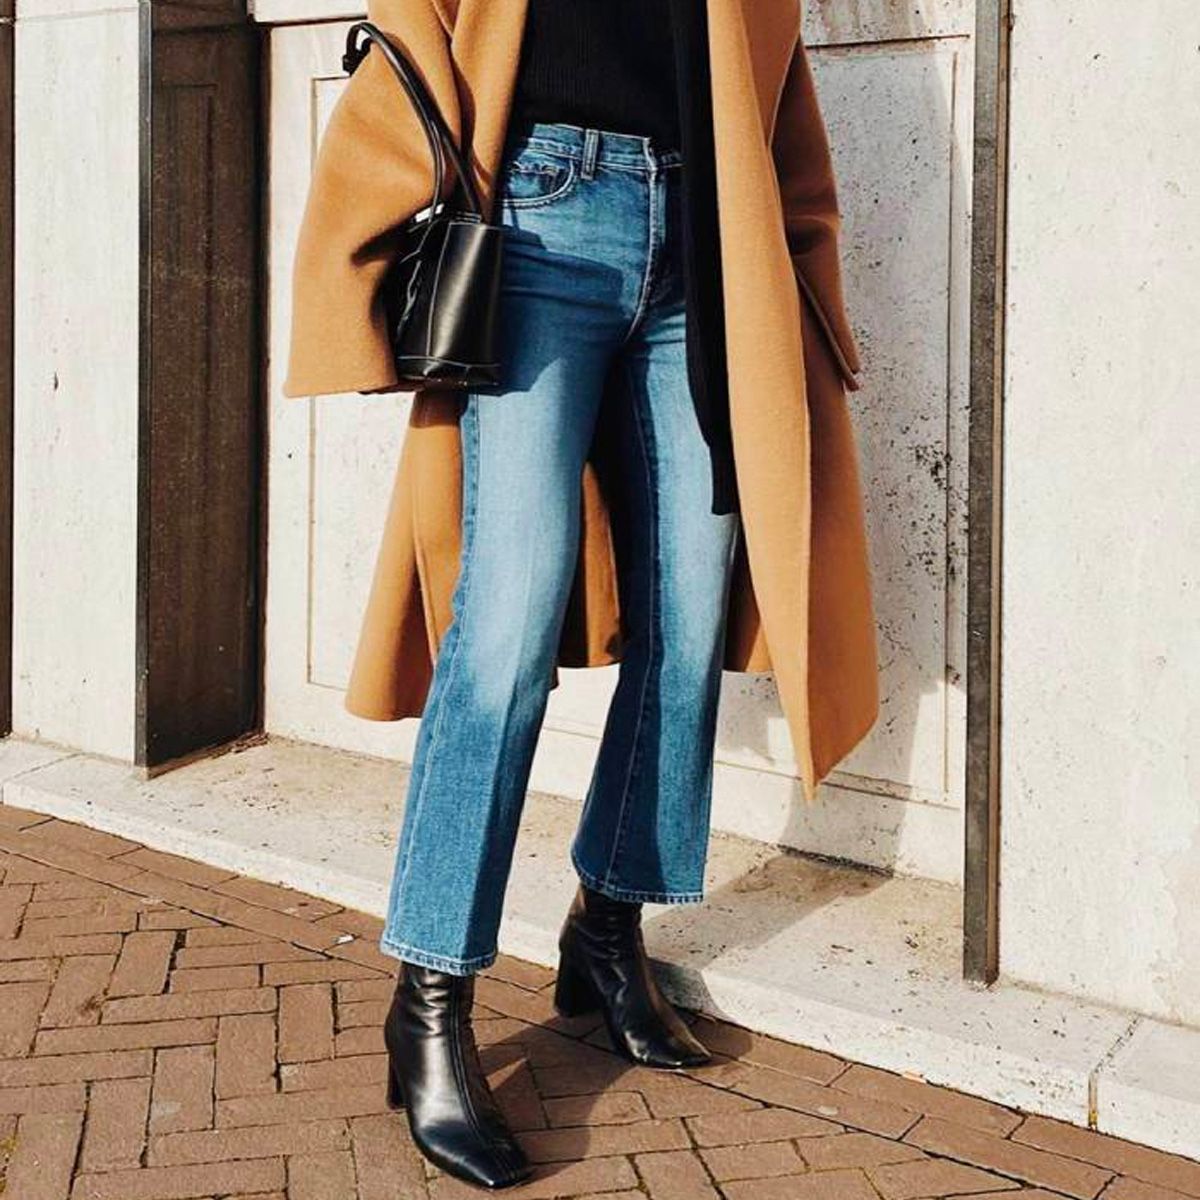 Jeans and Ankle Boots Outfit Idea: Let Your Boots Do The Talking